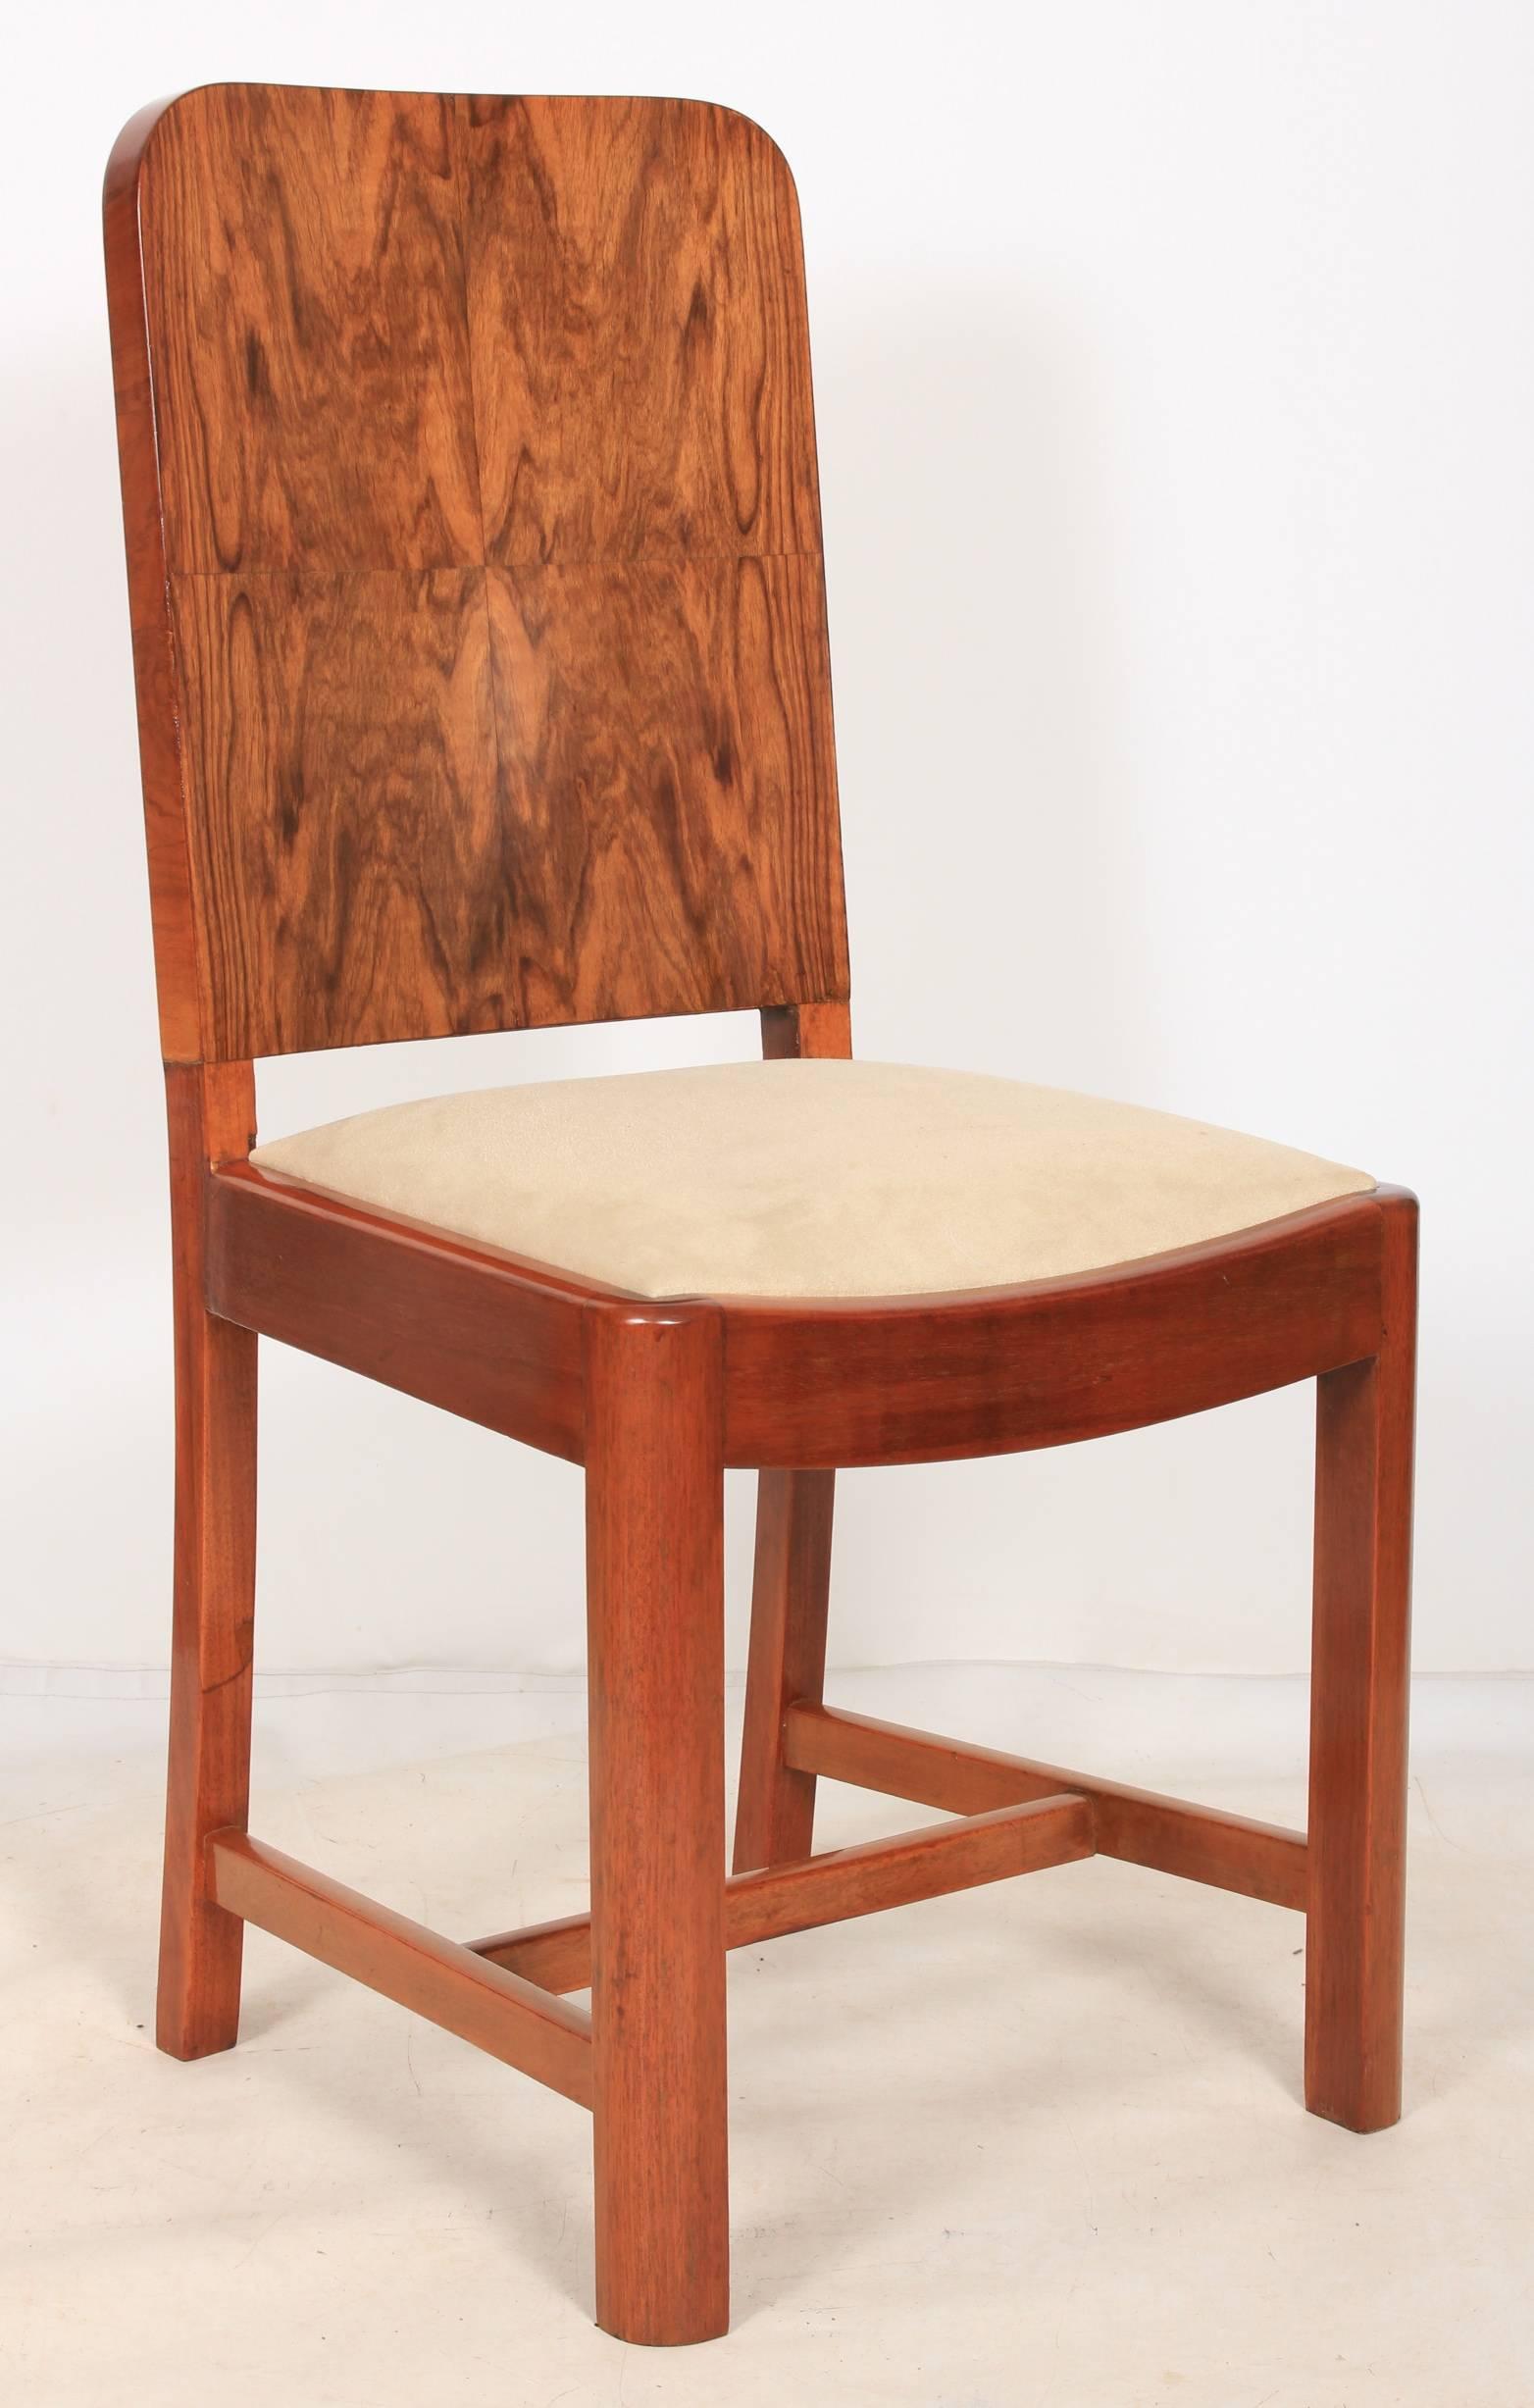 English, circa 1930.
A smart Art Deco dining suite, consisting of a shaped walnut dining table and 6 shaped back walnut chairs.
In showroom condition, this suite is a positive addition to any home.
The table has a quarter veneered cross-banded